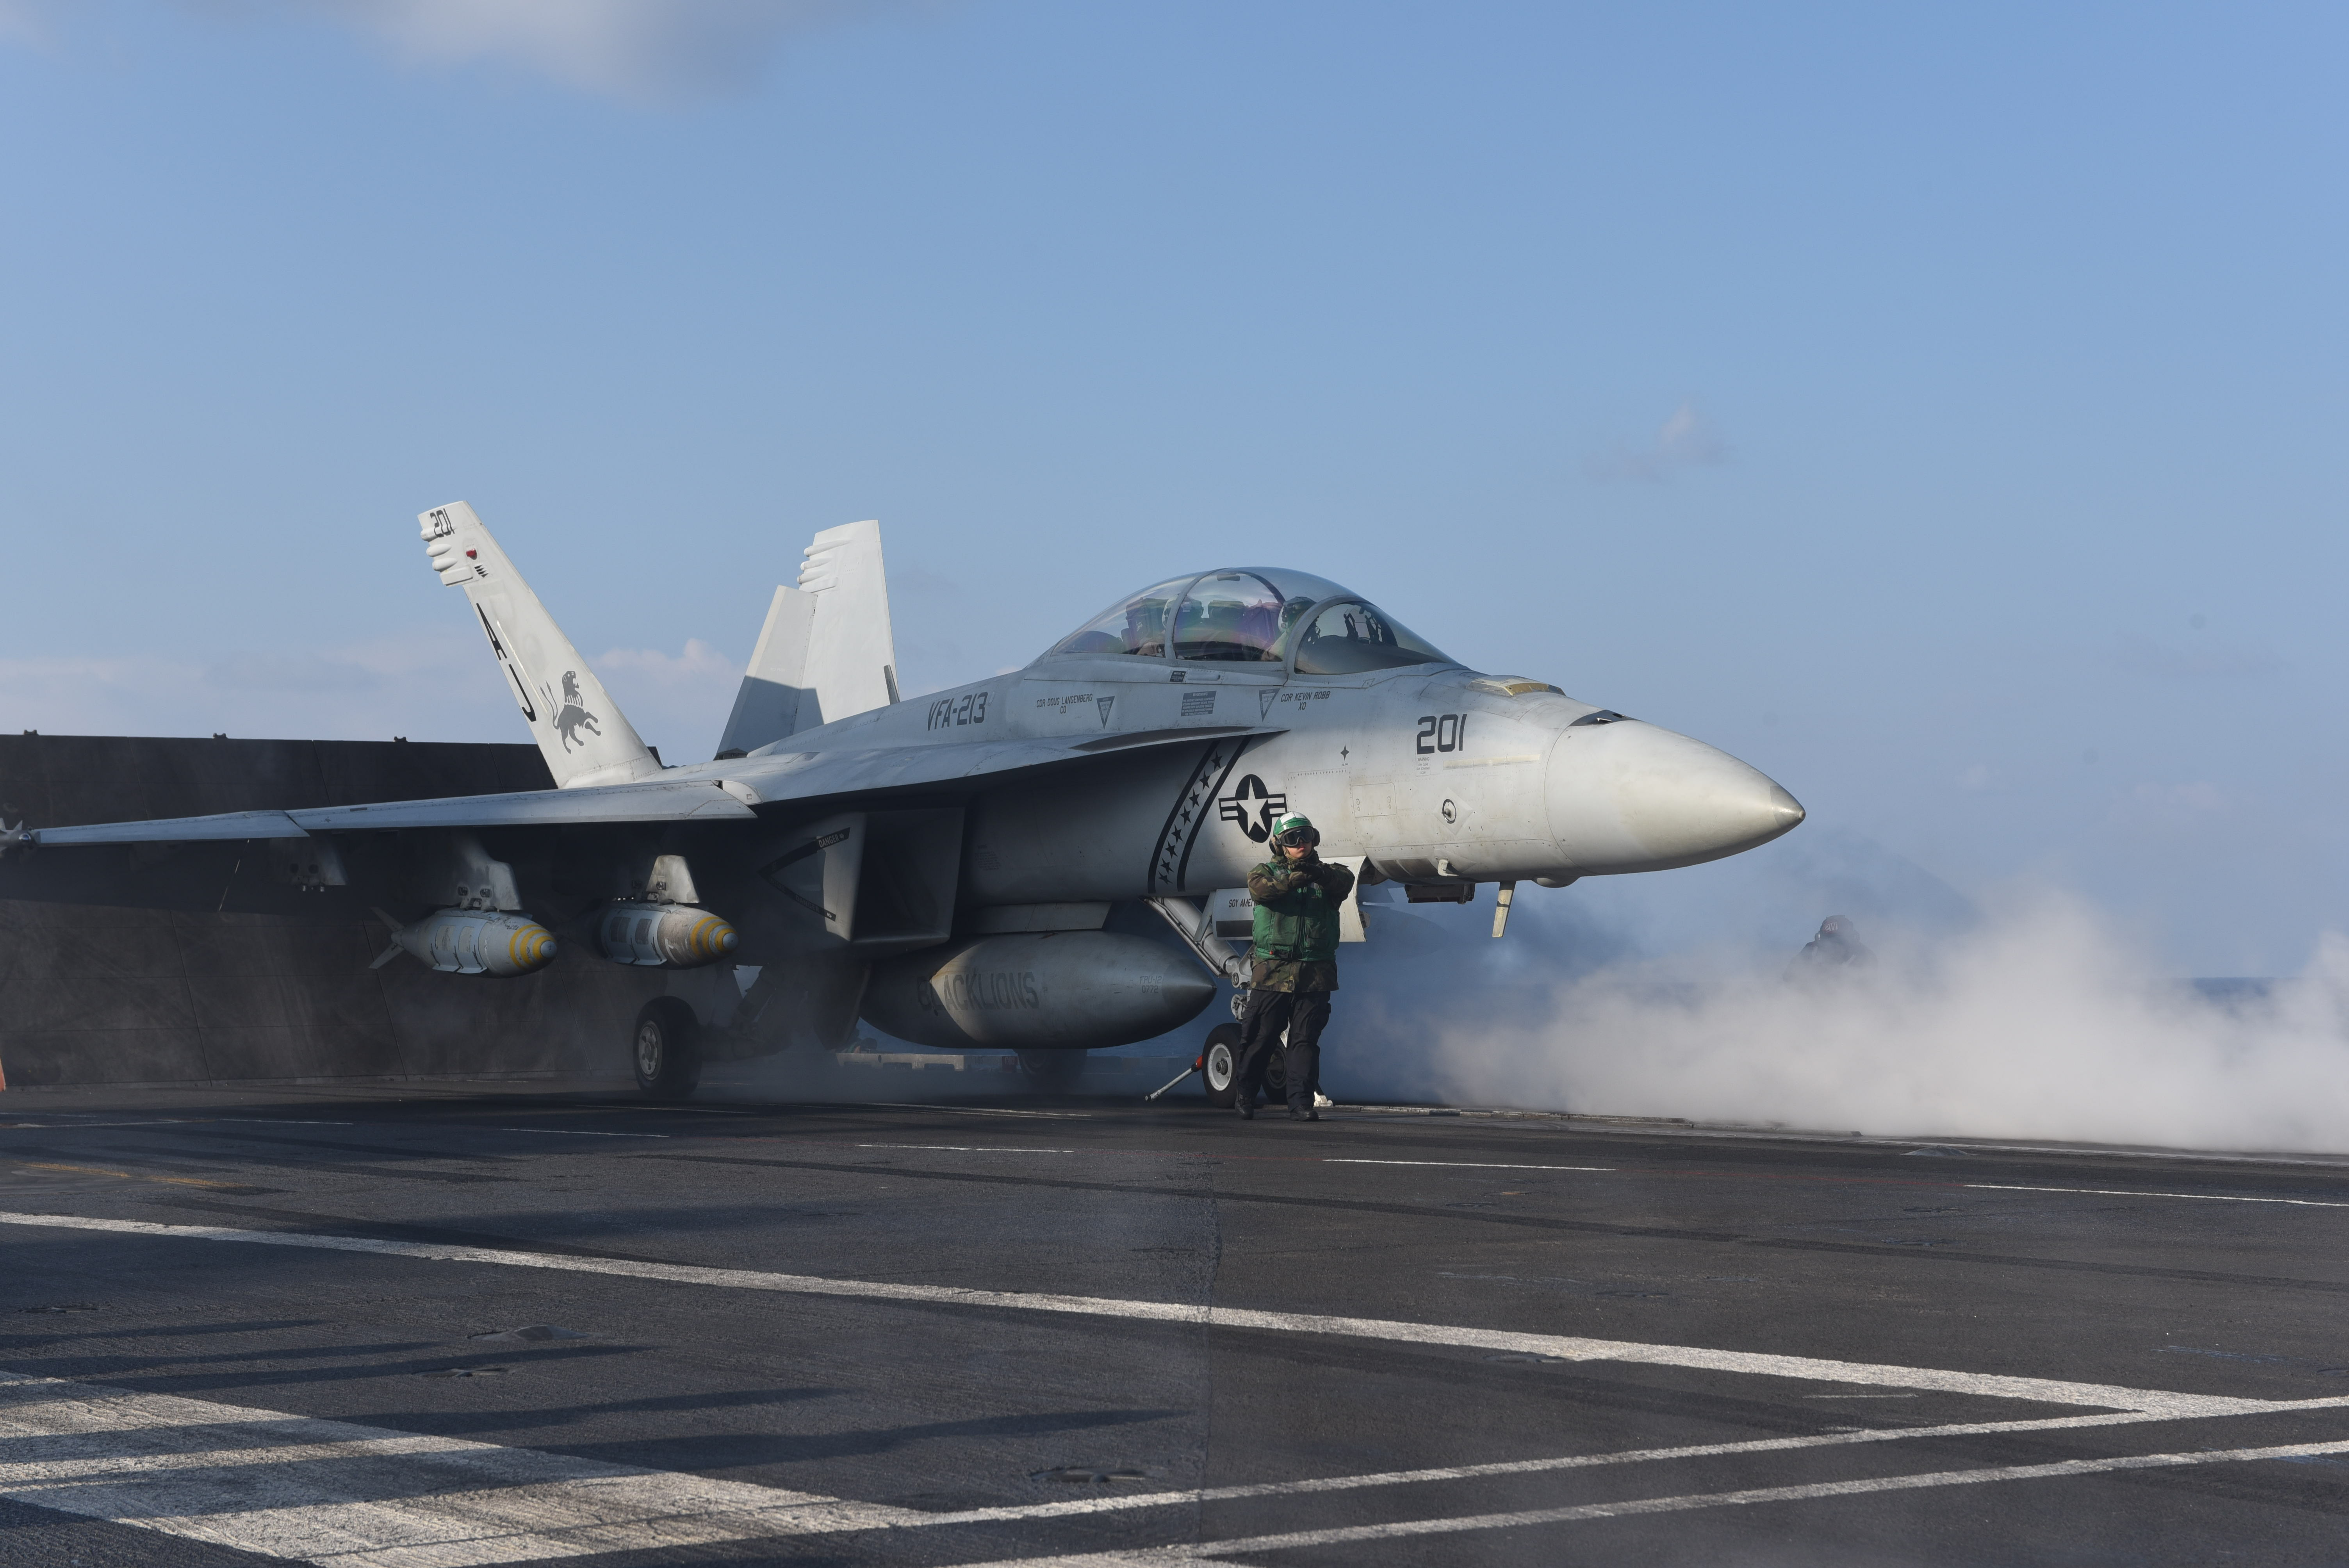 An F/A-18F Super Hornet attached to the Black Lions of Strike Fighter Squadron (VFA) 213 launches from the aircraft carrier USS George H.W. Bush (CVN 77) in support of Operation Inherent Resolve on Feb. 13, 2017. US Navy Photo